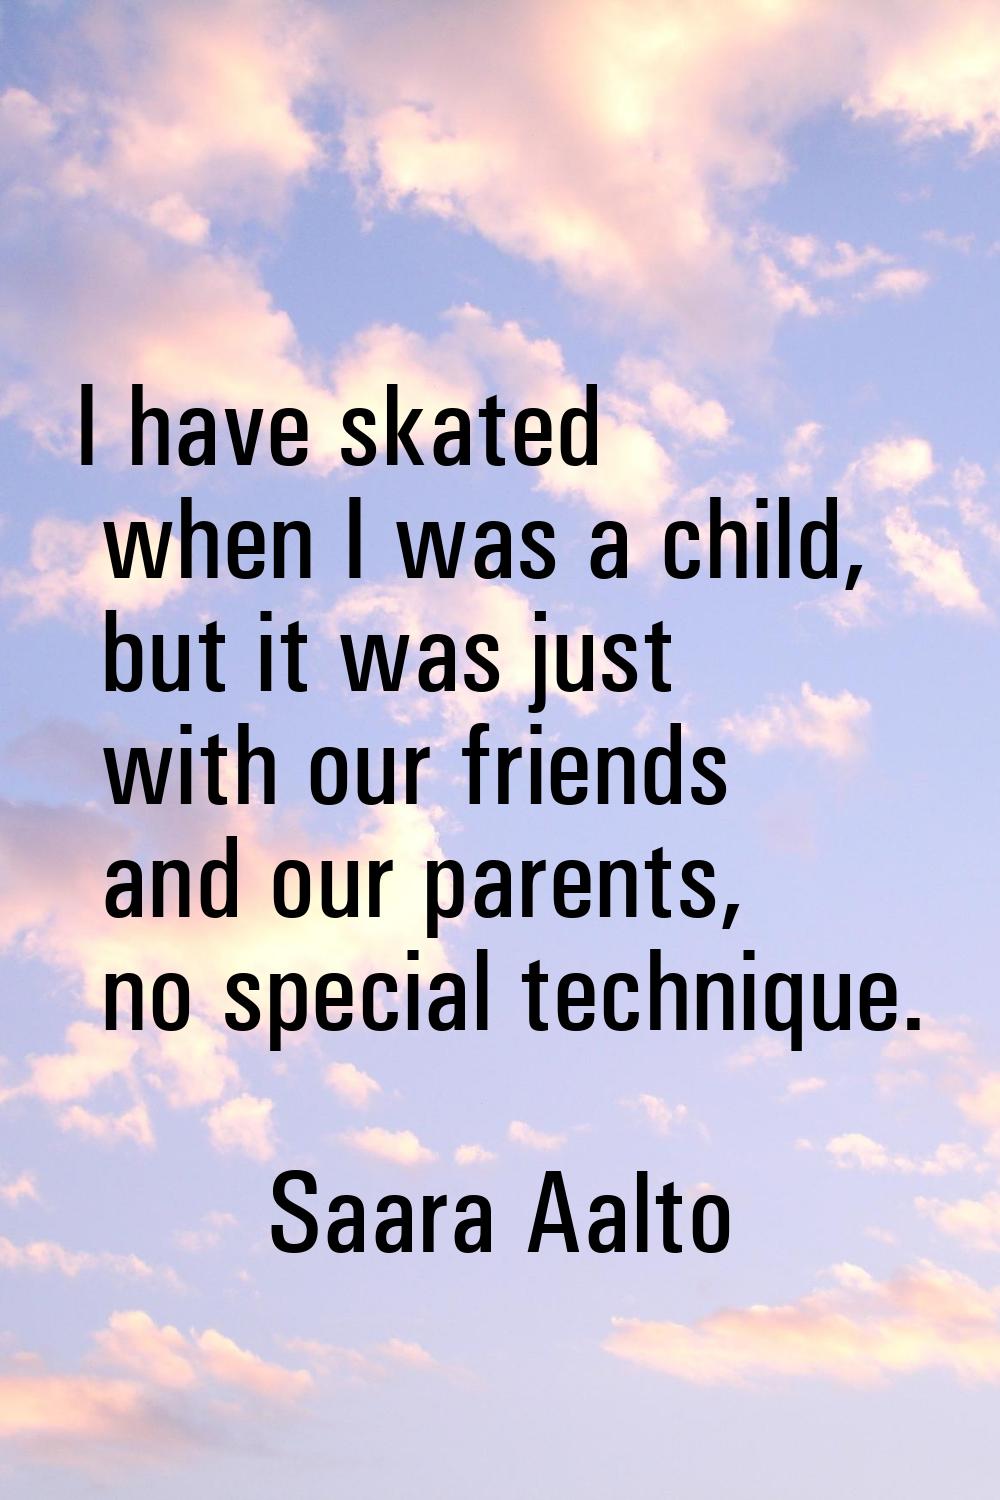 I have skated when I was a child, but it was just with our friends and our parents, no special tech